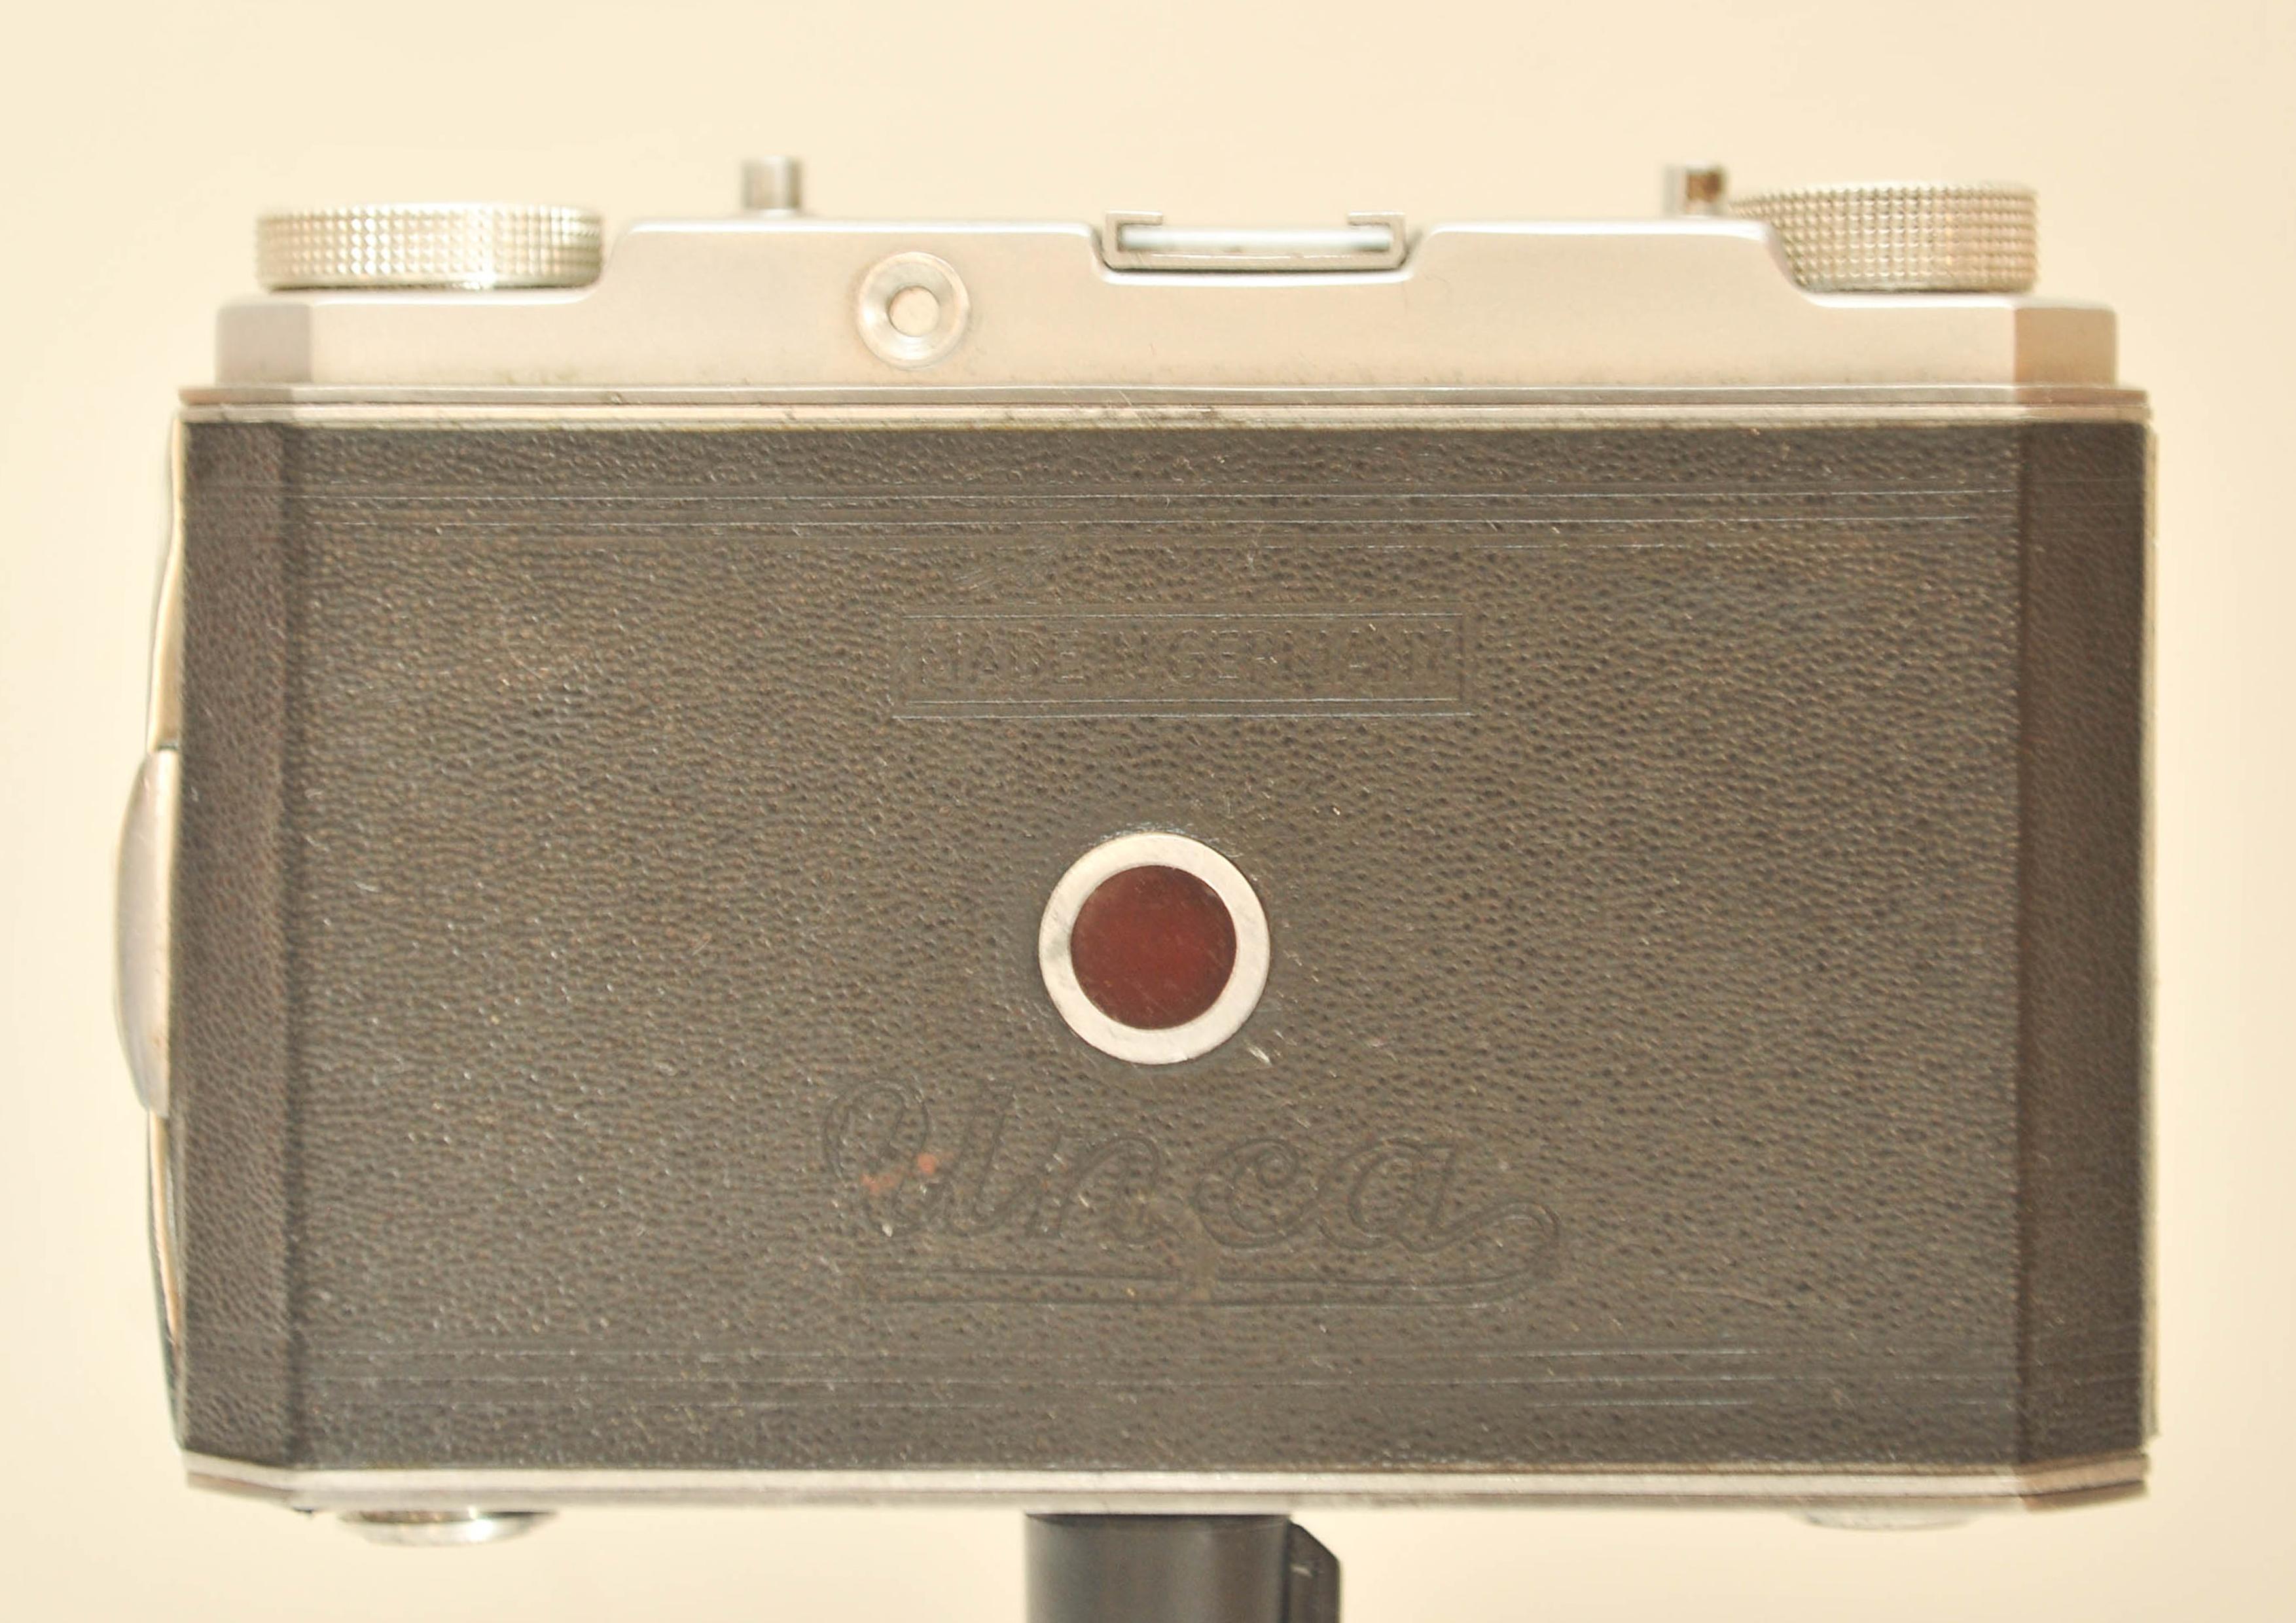 Rare Foitzik Trier Unca 120 Roll Film Bellow Camera Made in Germany 1952  For Sale 1